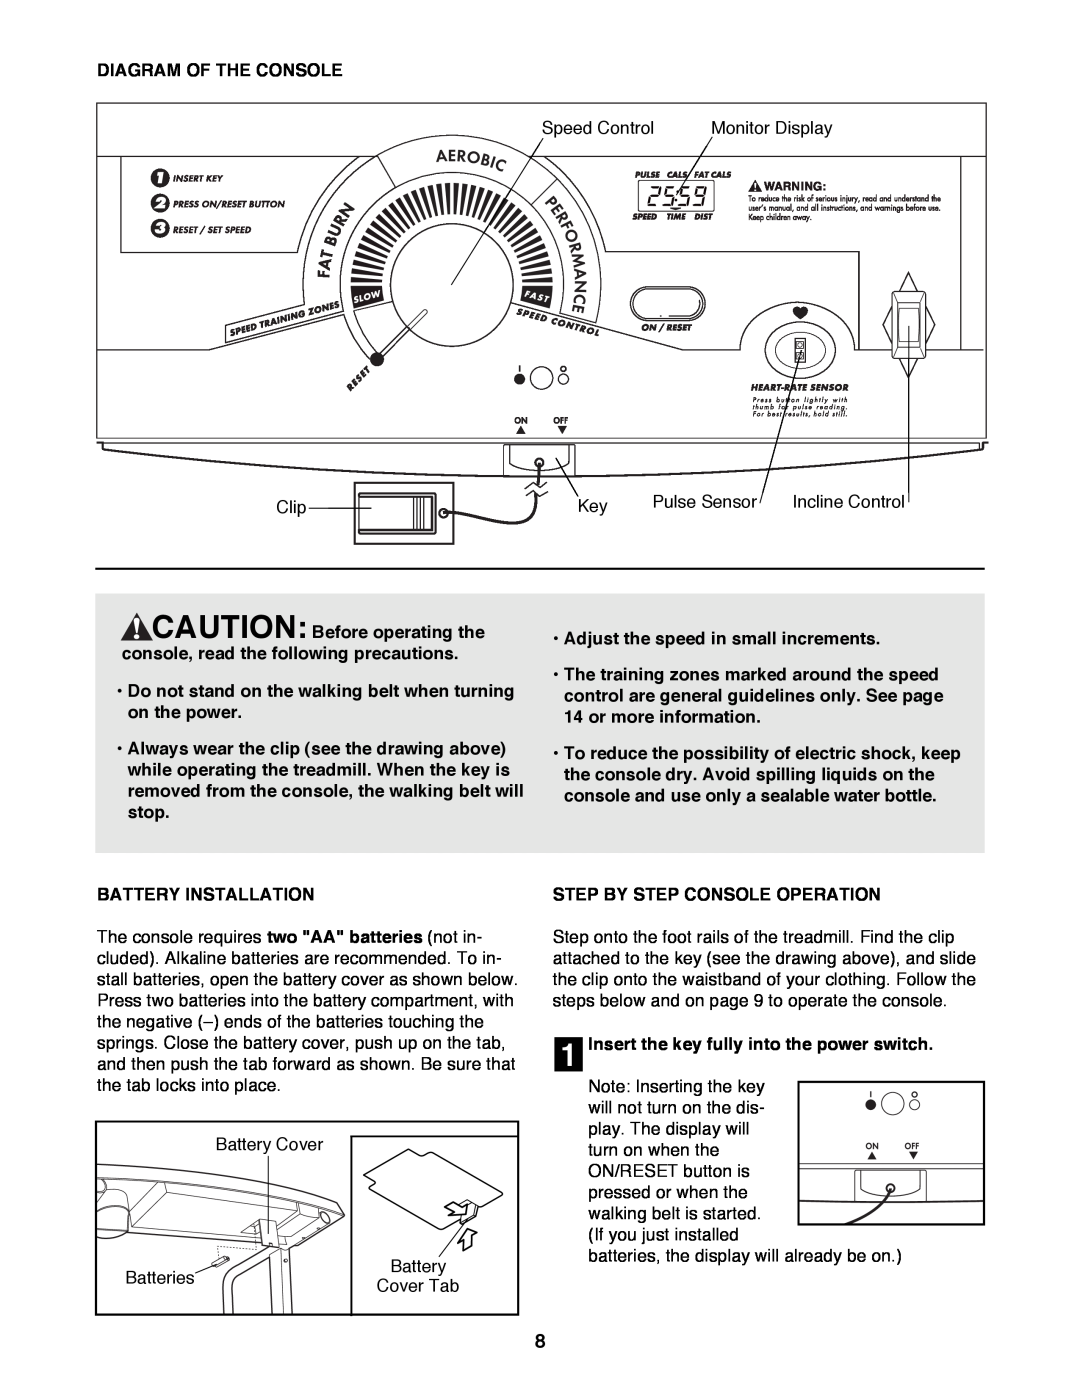 ProForm PFTL39191 user manual Diagram Of The Console, CAUTION Before operating the console, read the following precautions 